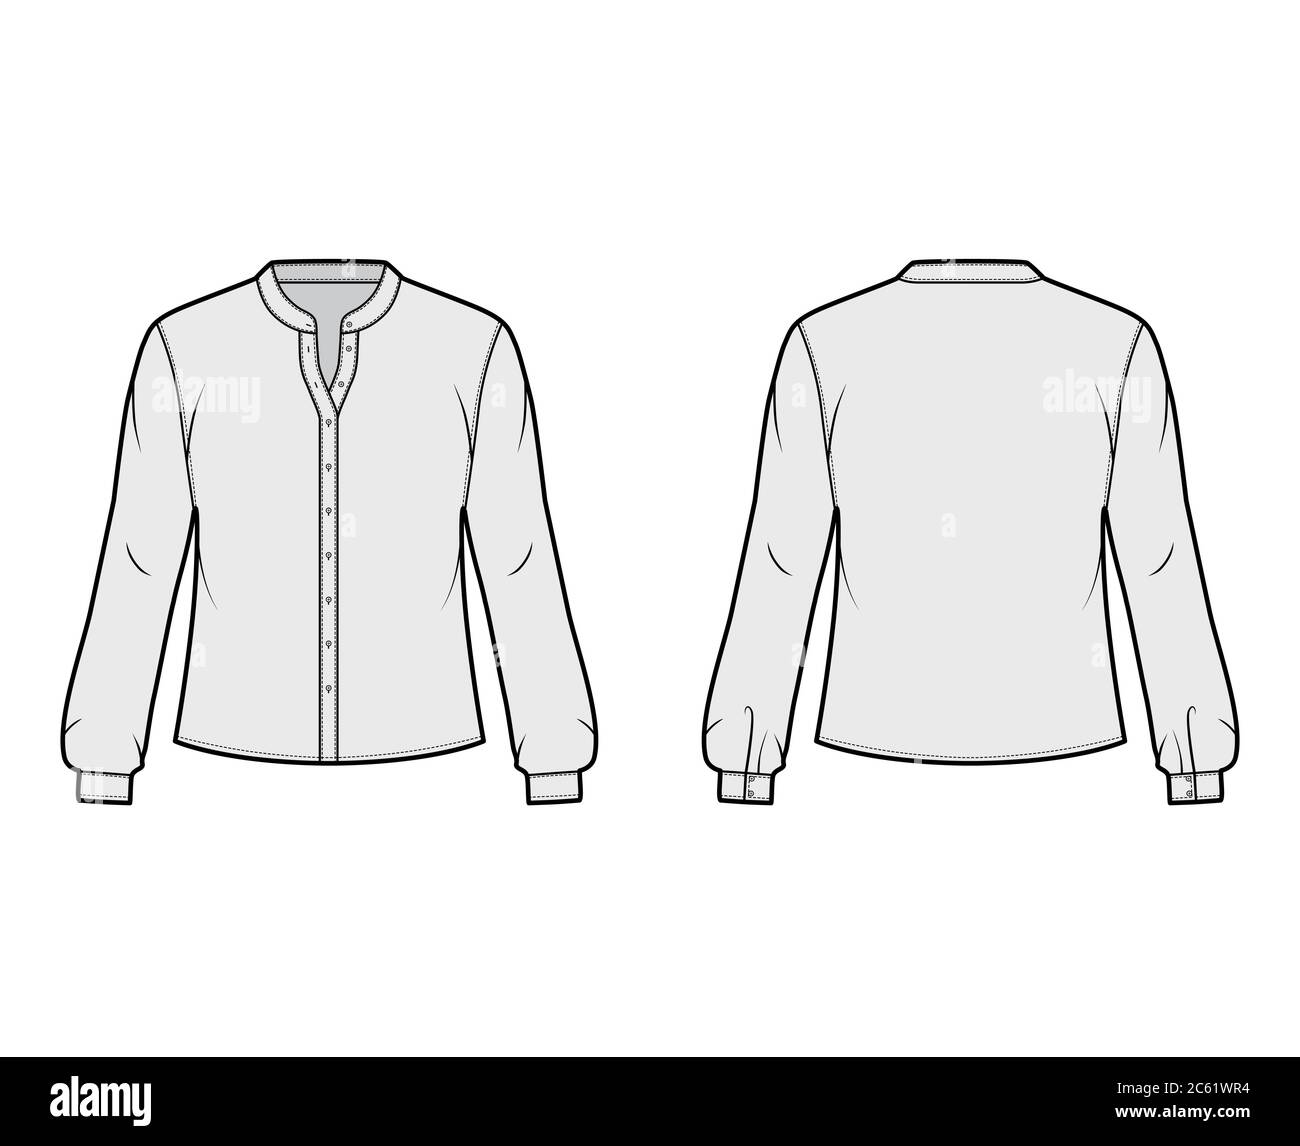 Shirt technical fashion illustration with curved mandarin stand collar ...